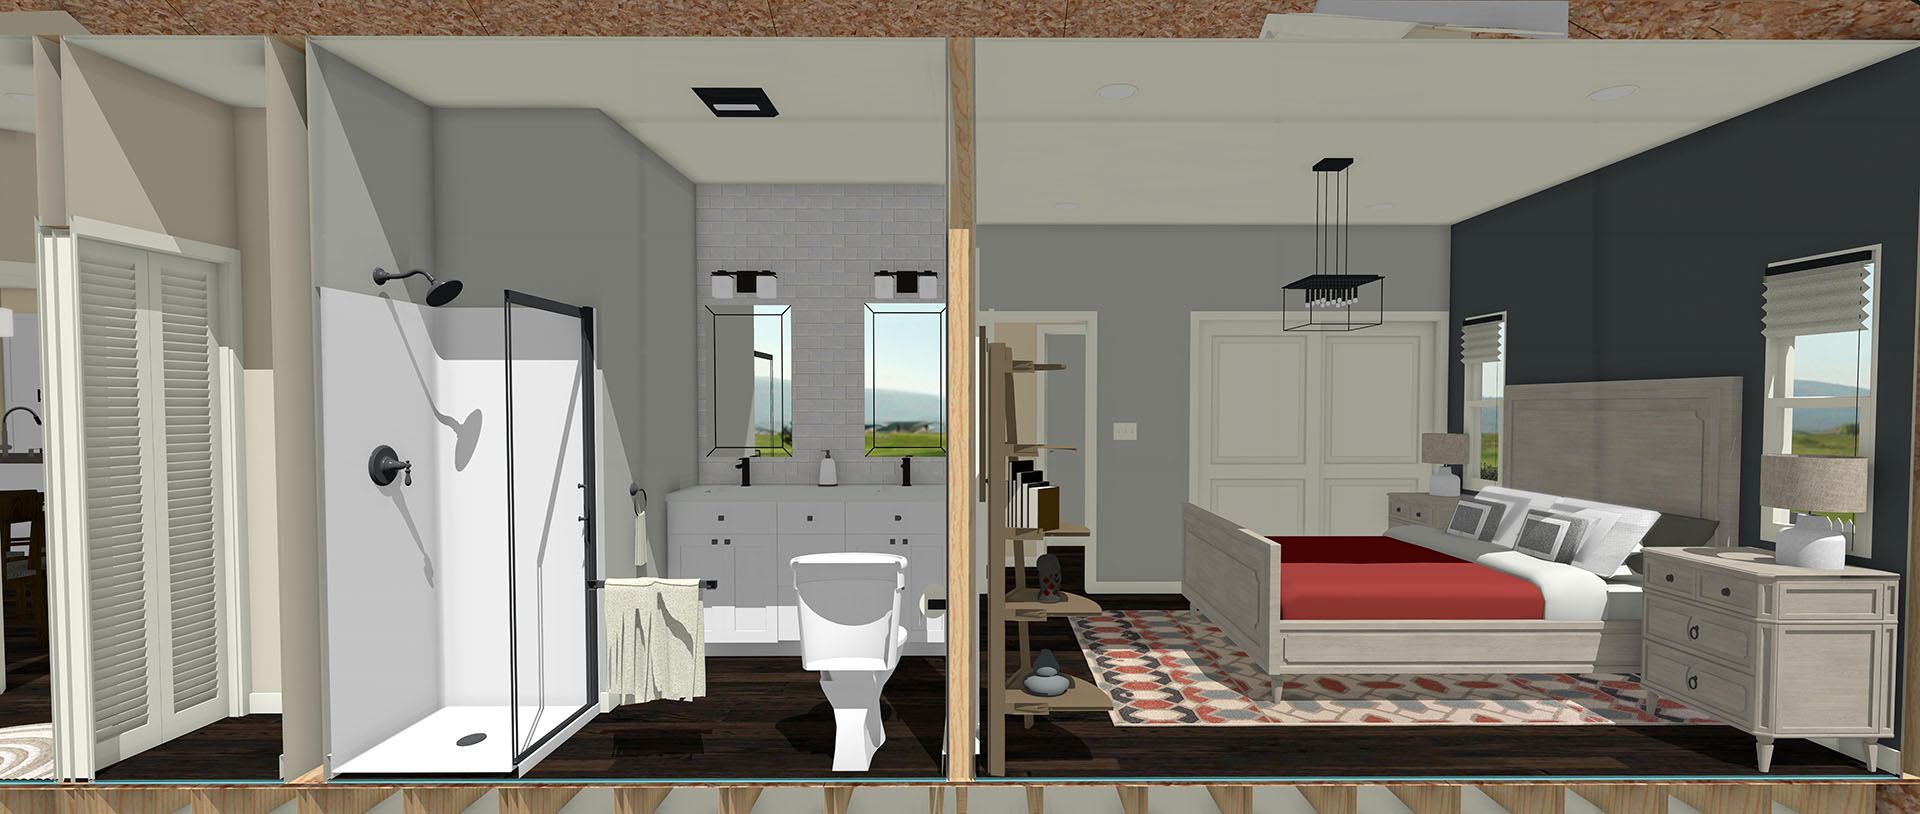 Interior cross section of the master suite